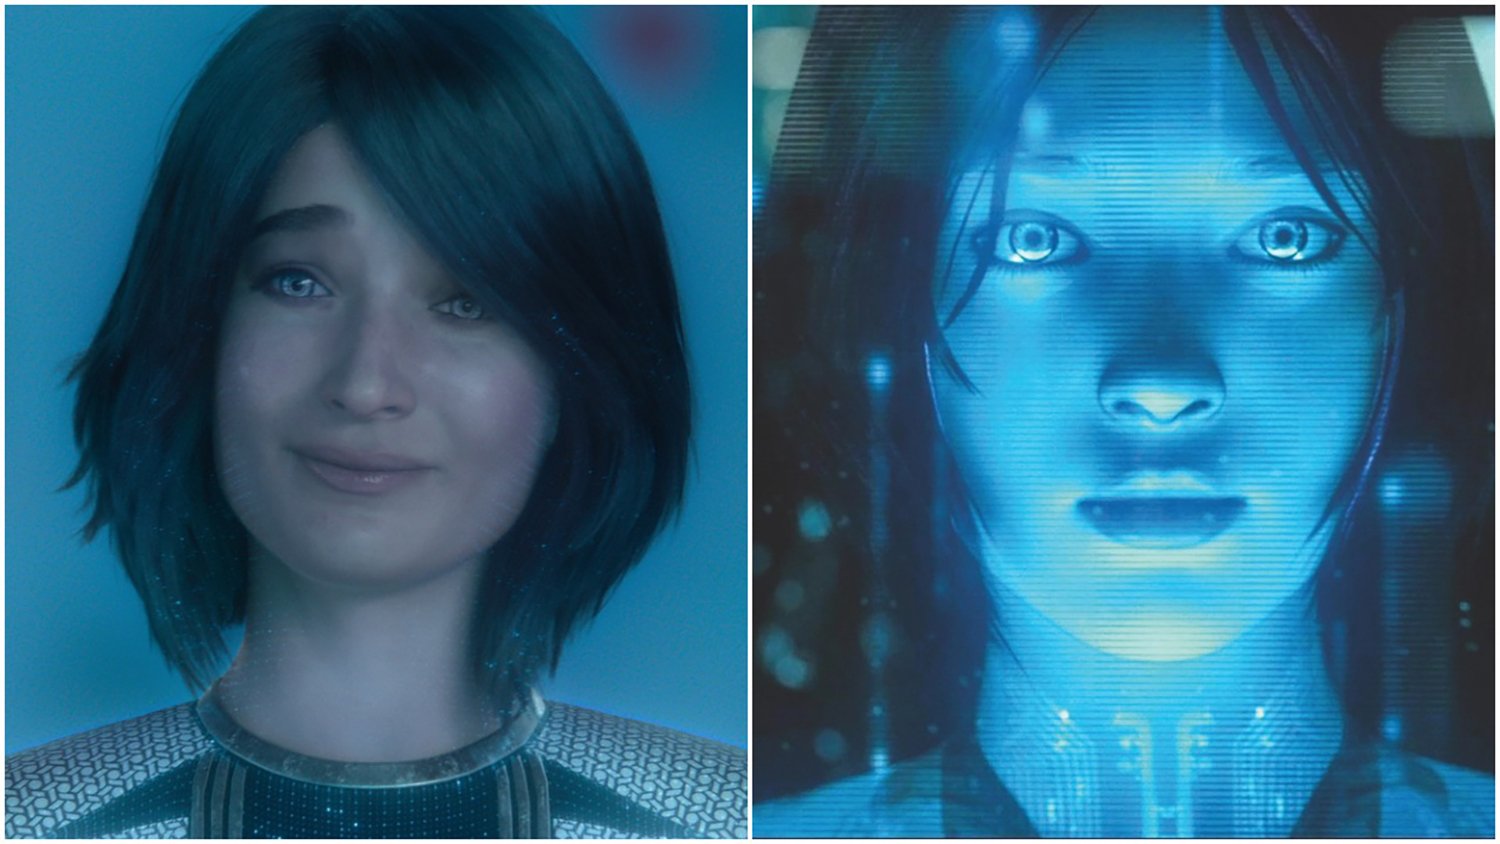 Cortana in the Halo TV Series versus Cortana in the video games